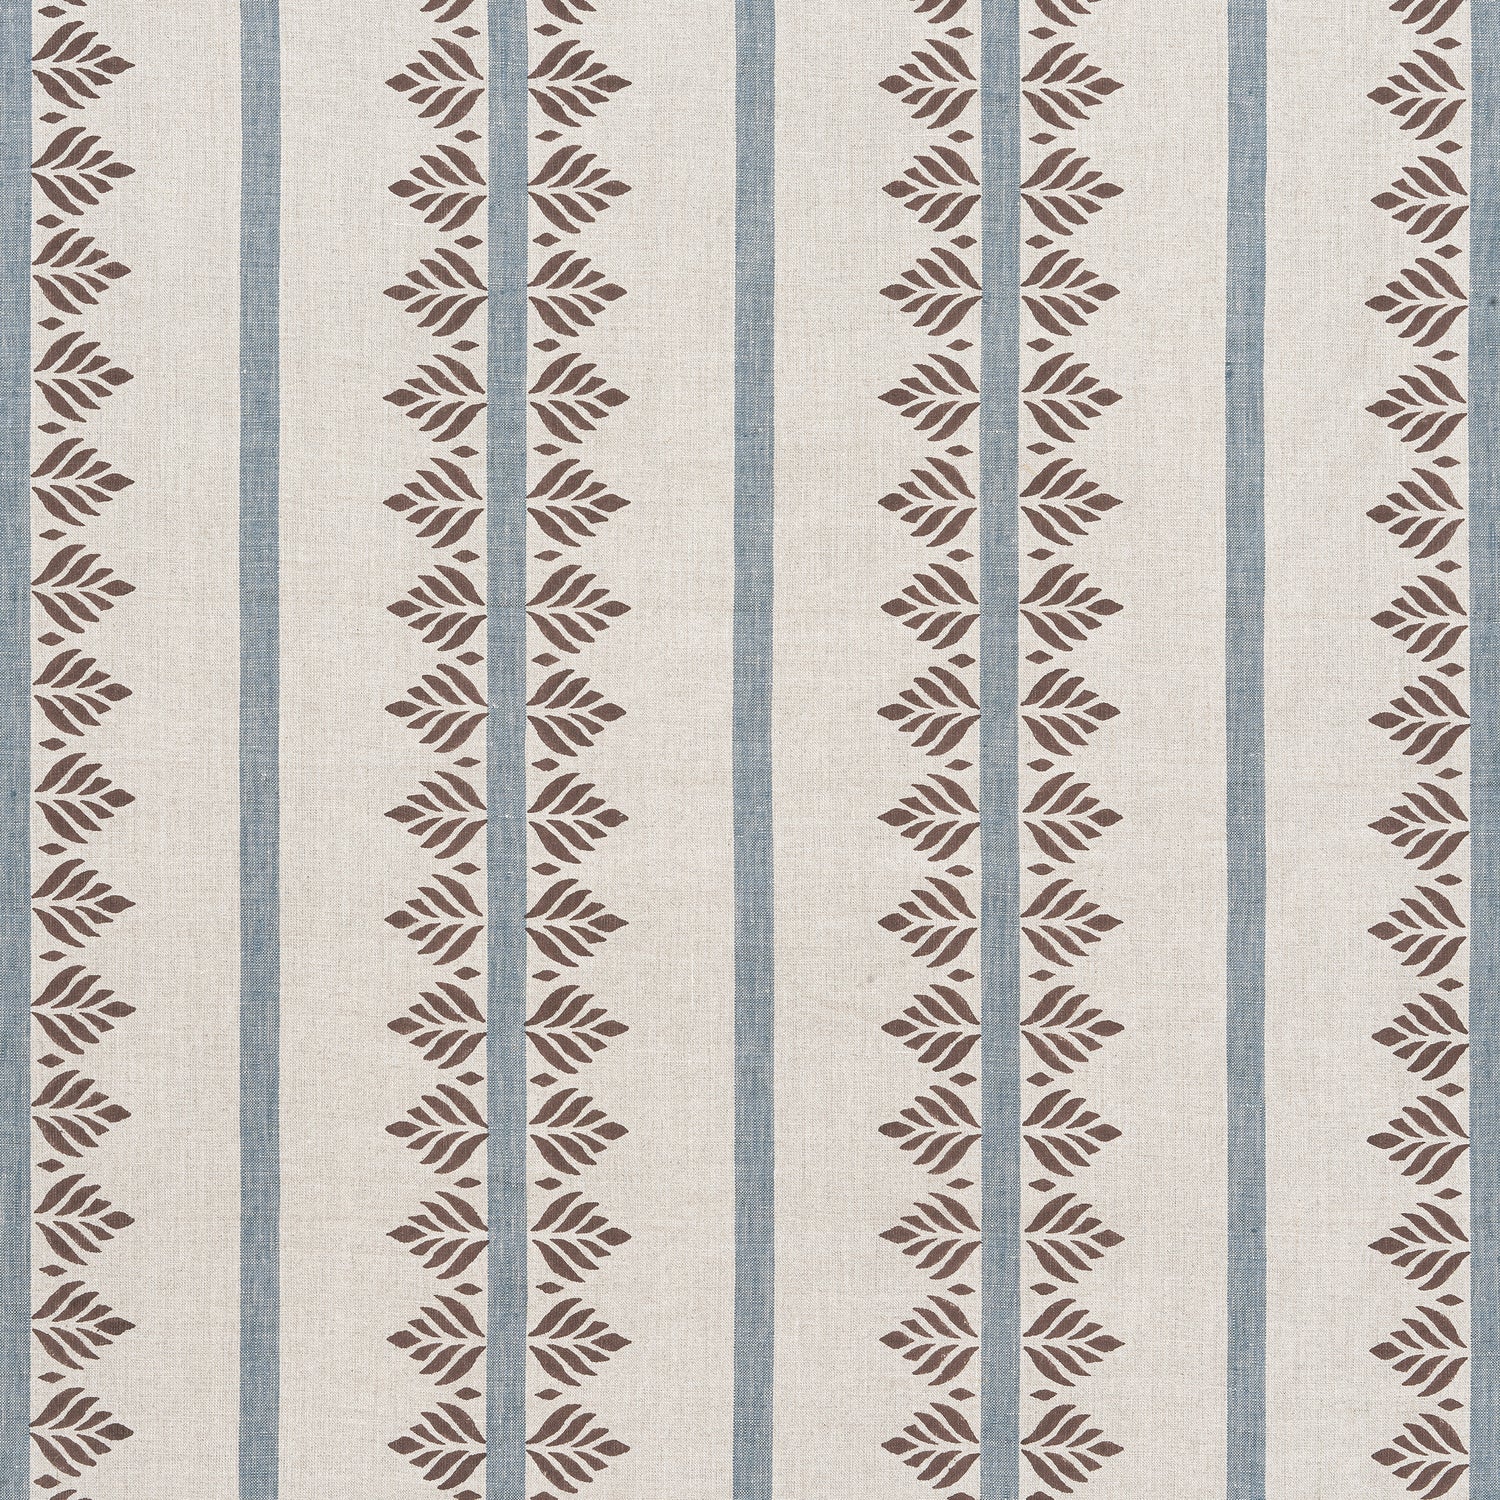 Fern Stripe fabric in brown and slate color - pattern number AF15106 - by Anna French in the Antilles collection